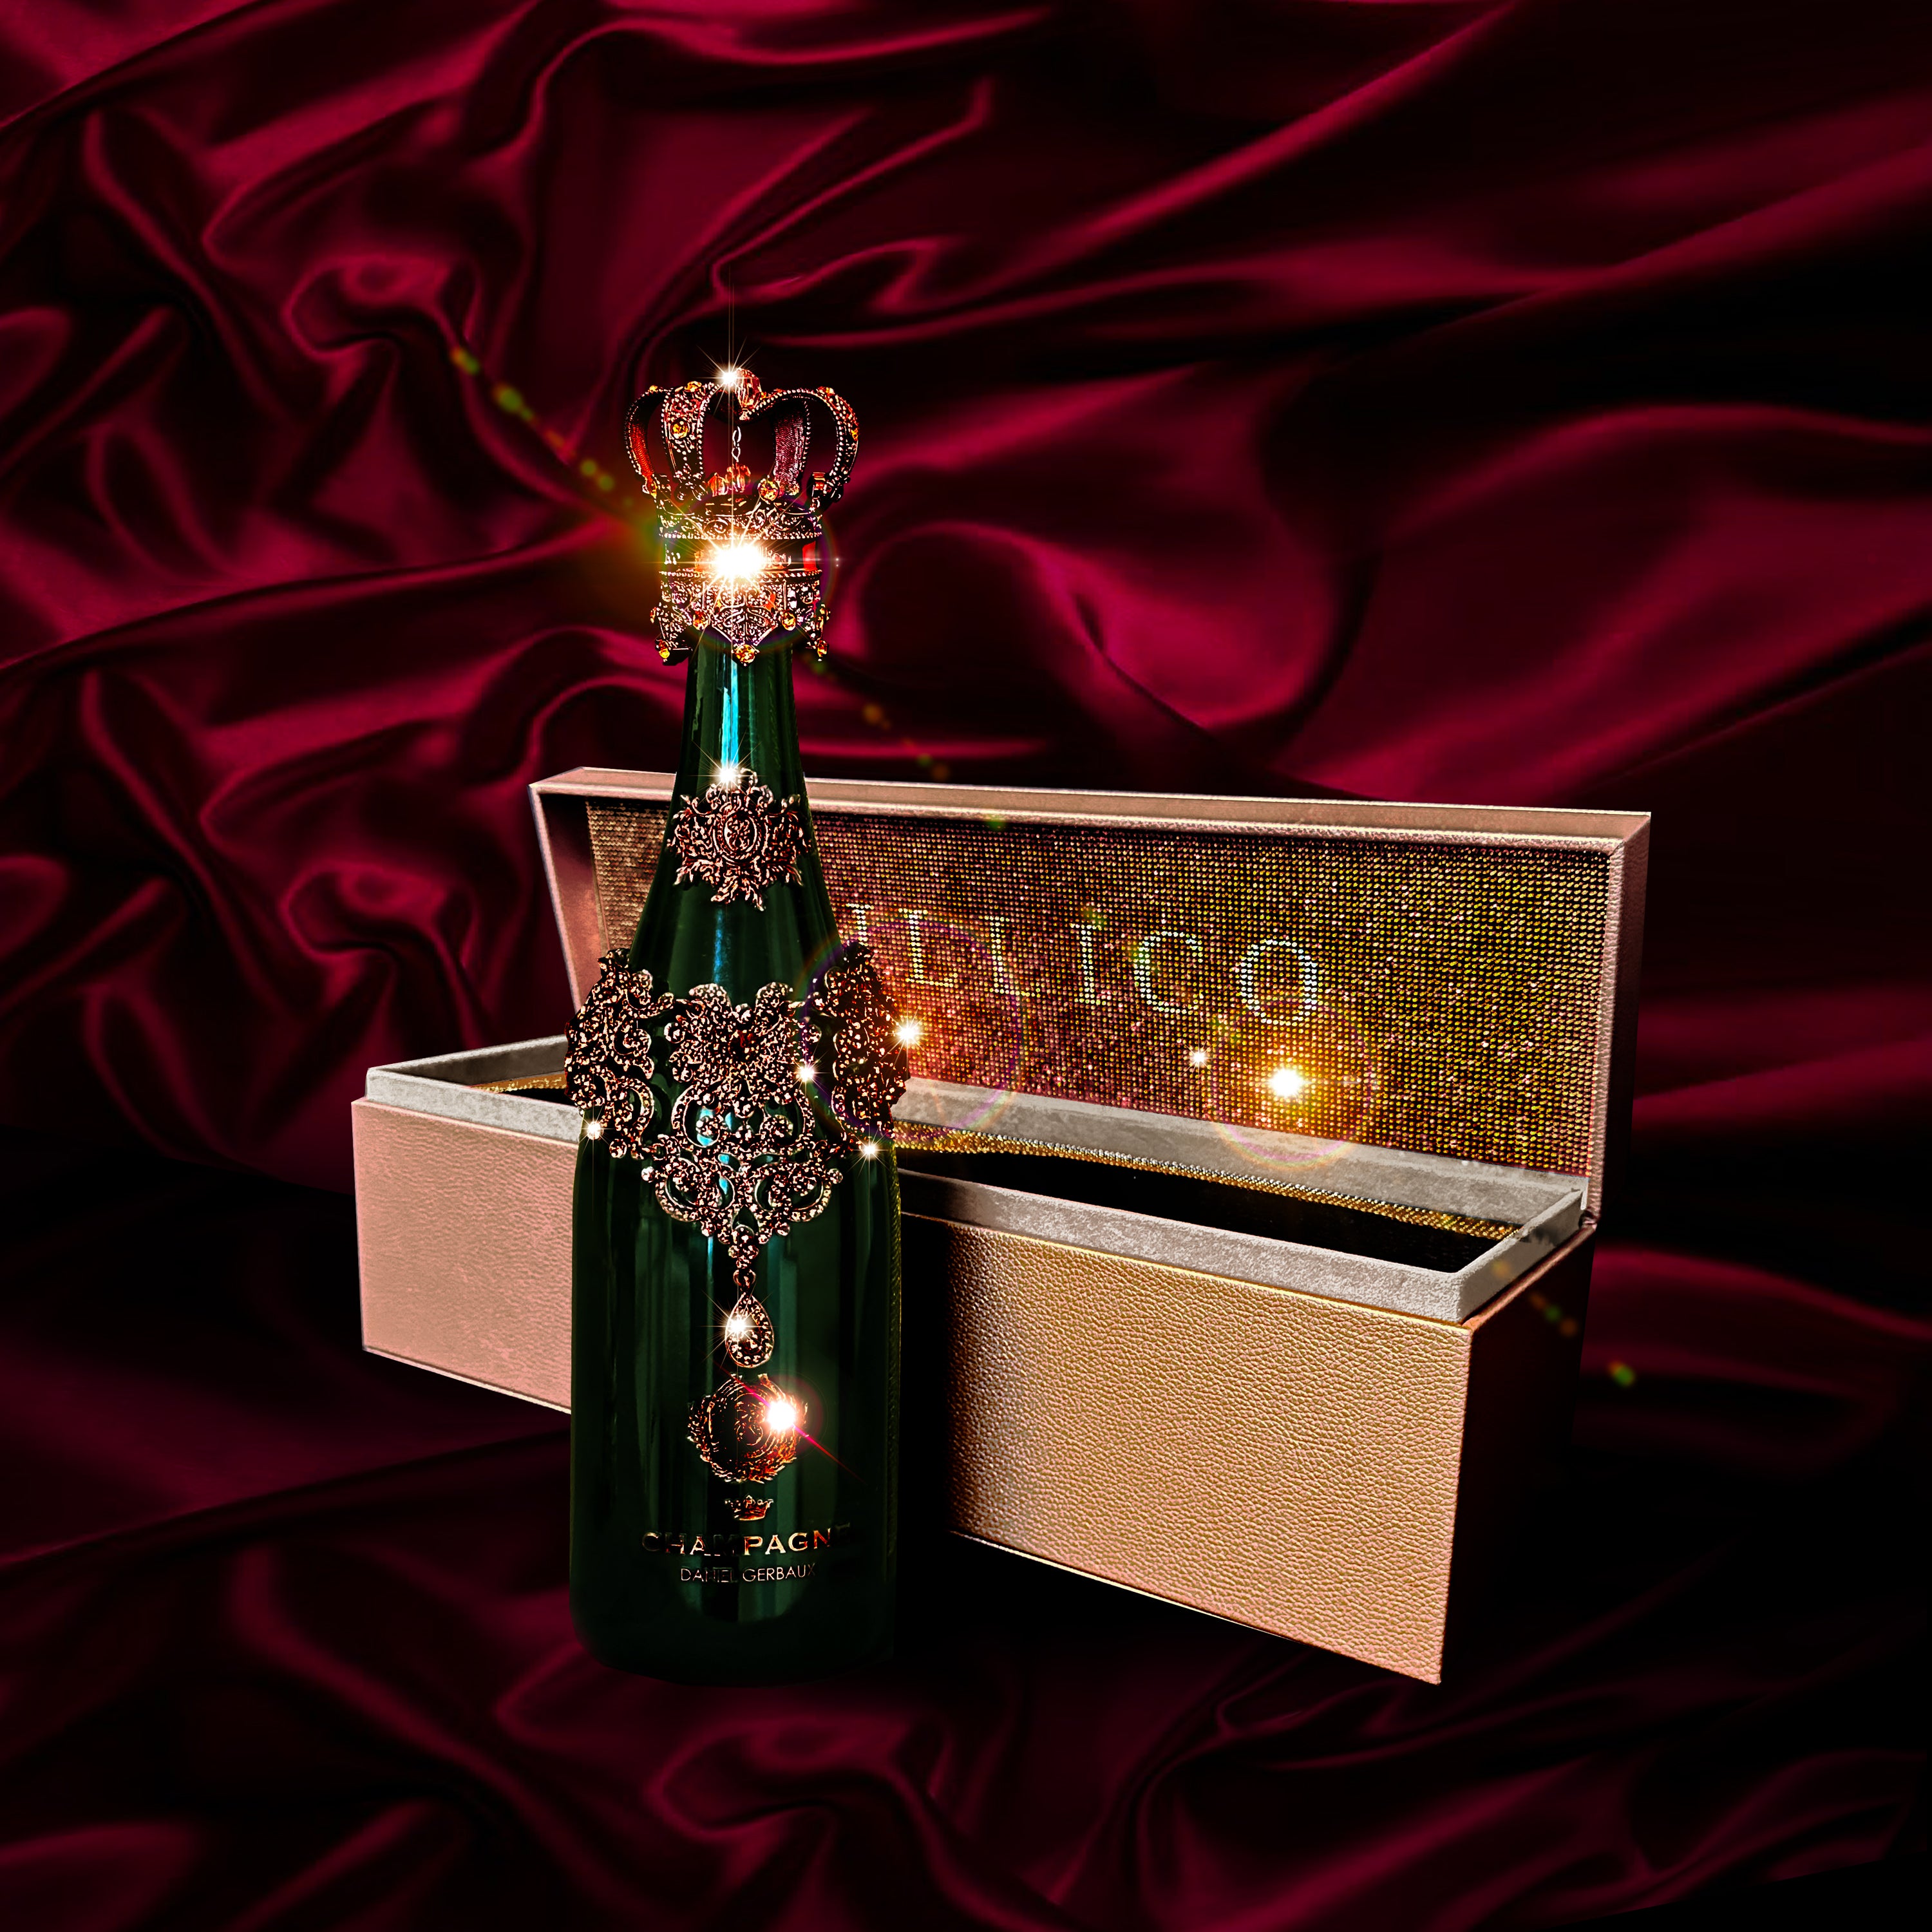 FILLICO CHAMPAGNE OFFICIAL STORE